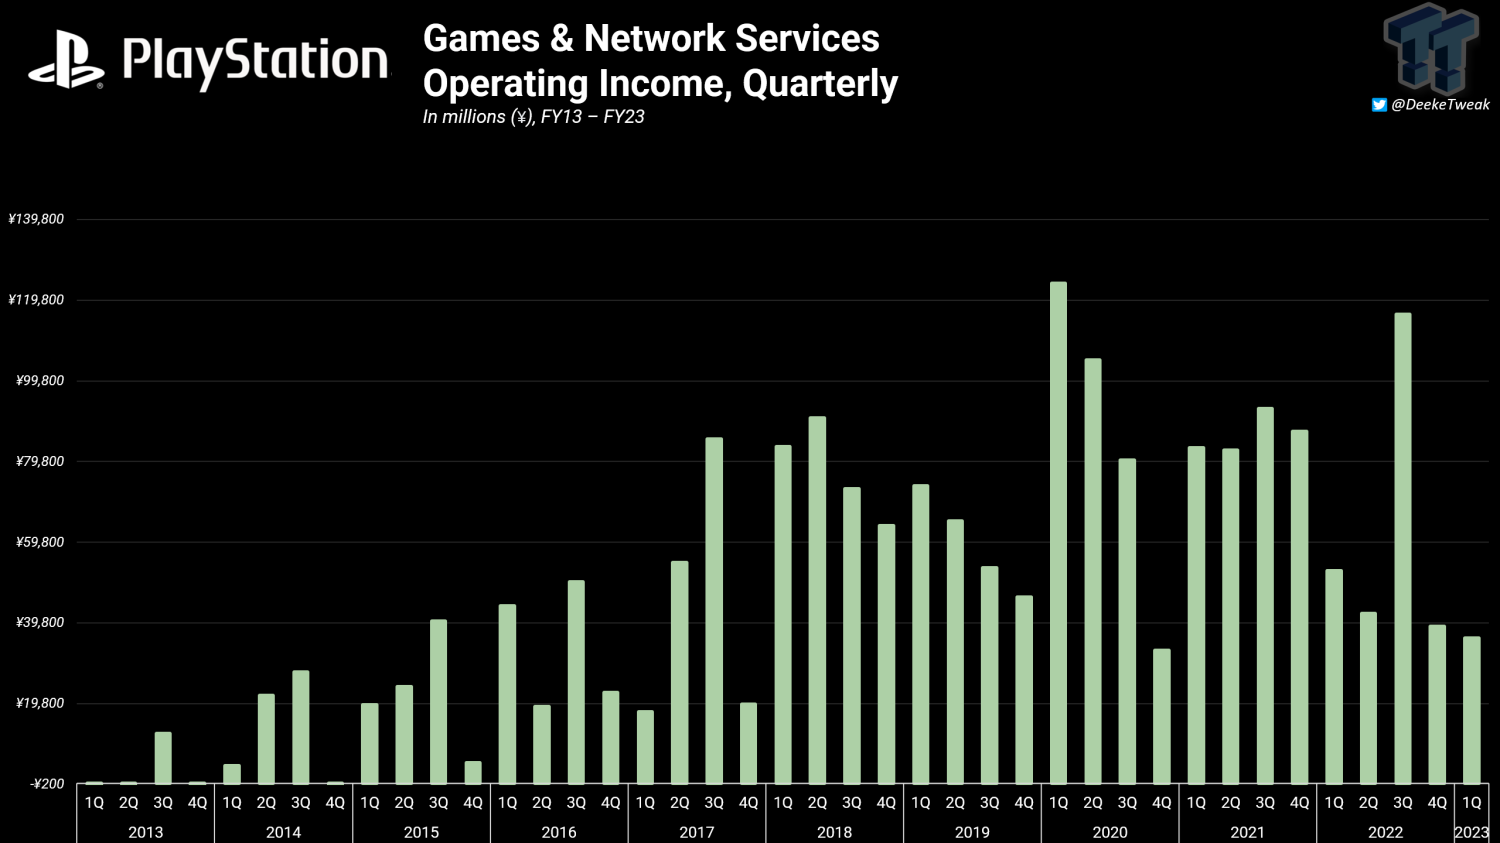 PlayStation PC games revenue so far; to Have 50 / 50 % Investment on new &  existing IP By 2025; +20 games for VR2 launch + more